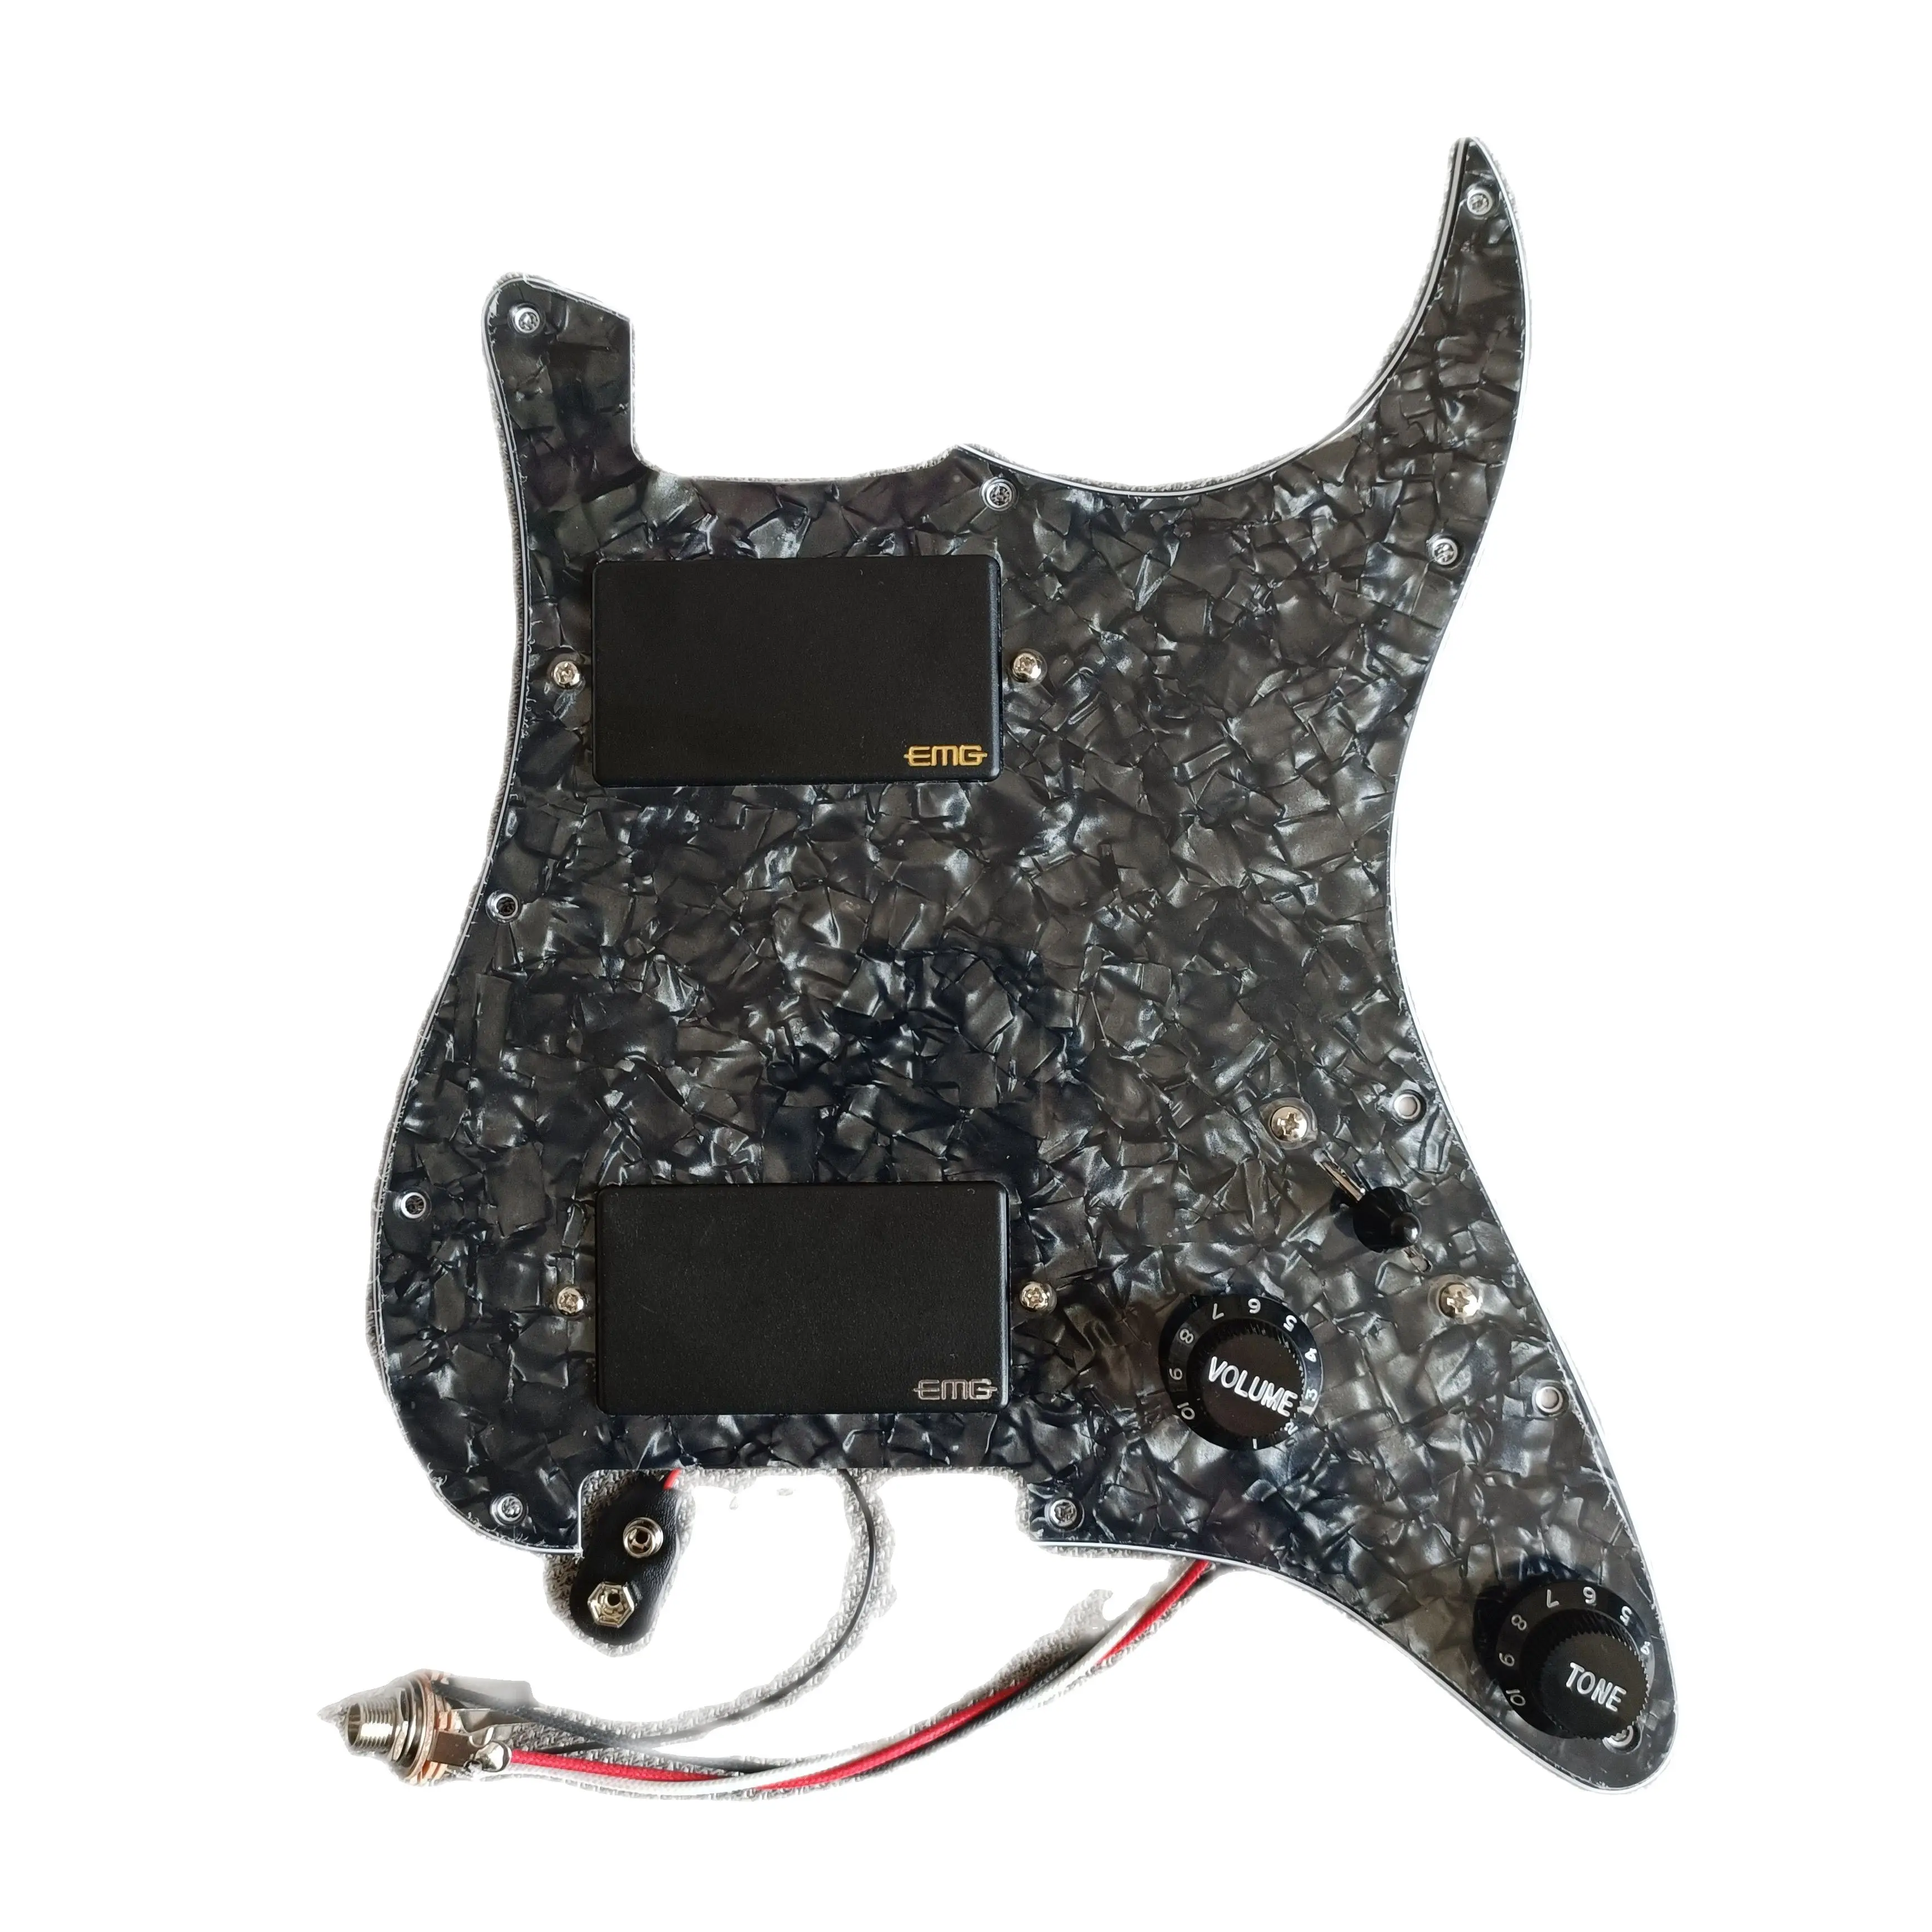 

Upgrade Prewired Loaded Pickguard HH Humbucker Active Pickups Set For ST Guitar,Musical Instruments Accessories